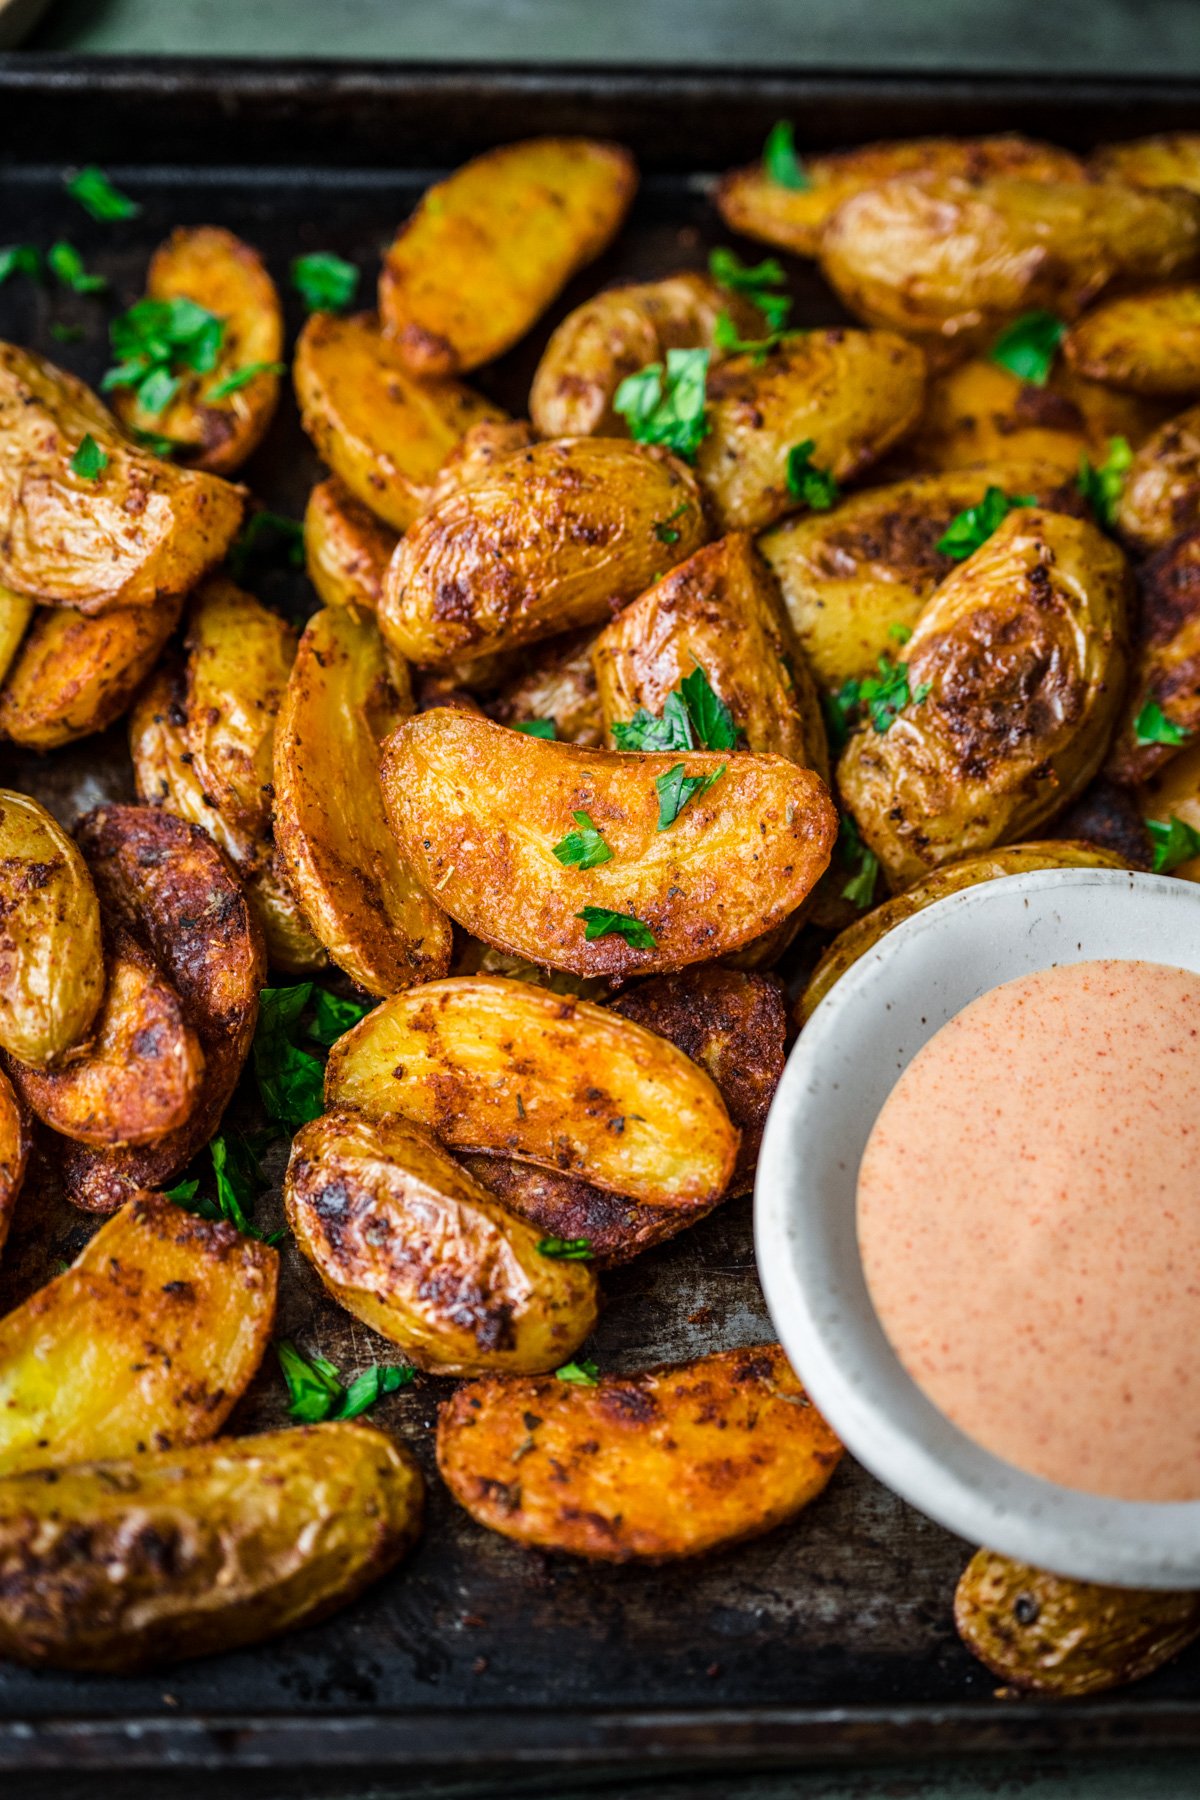 Front view of cajun potatoes alongside a small cup of dip.